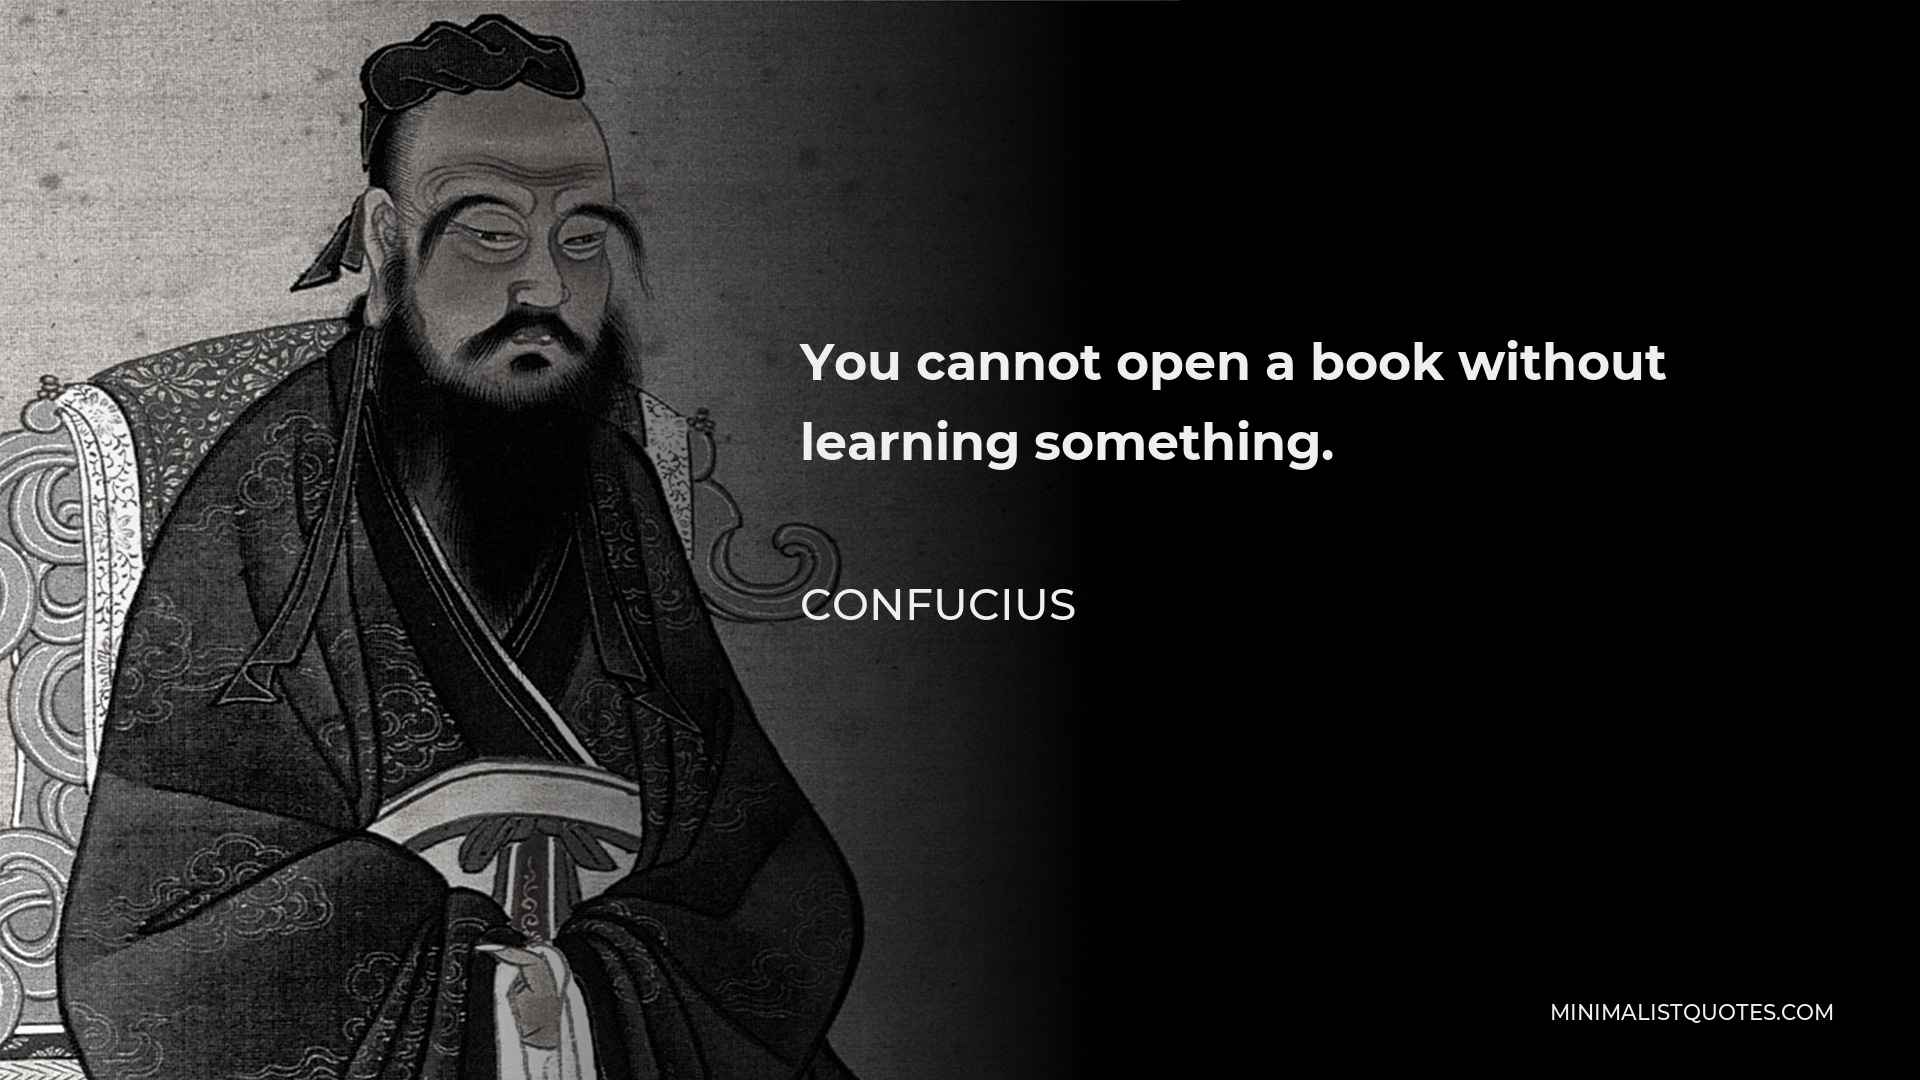 Confucius Quote - You cannot open a book without learning something.